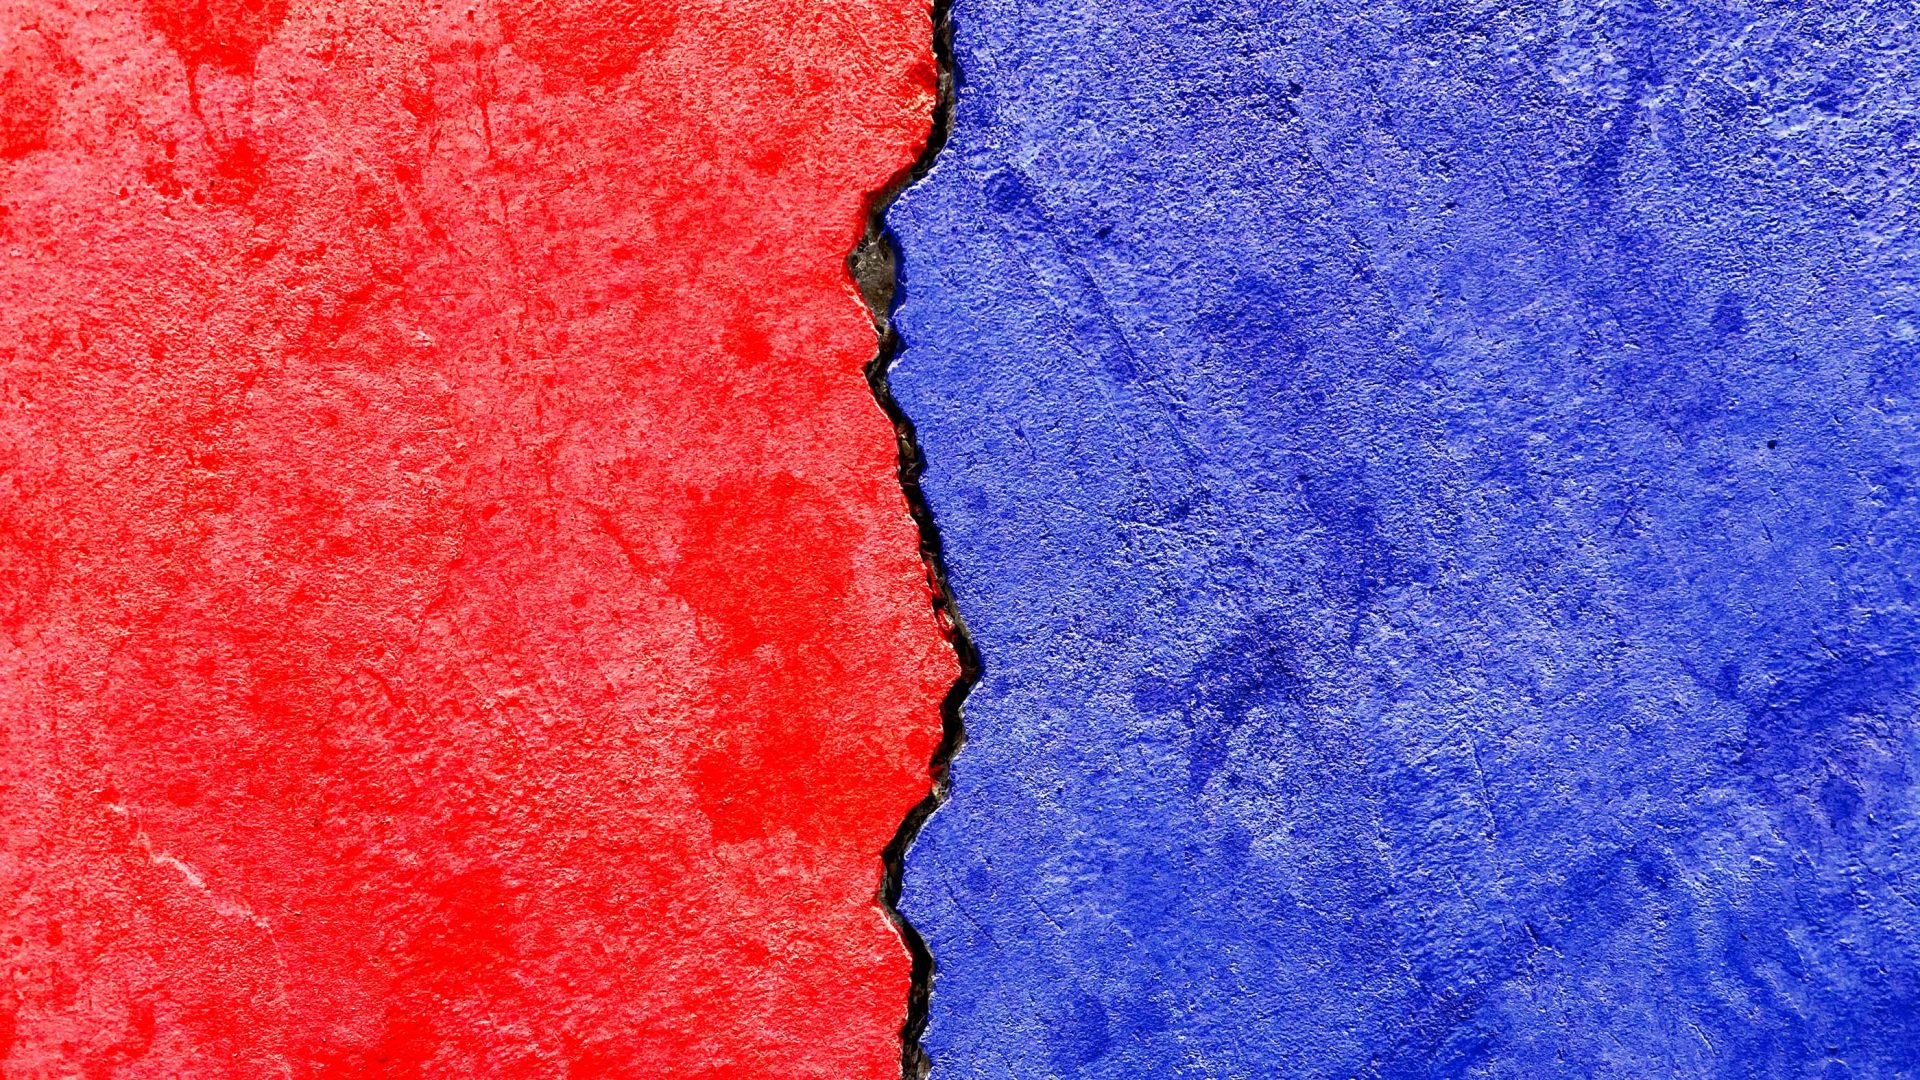 Why is crimson for Republicans and blue for Democrats?